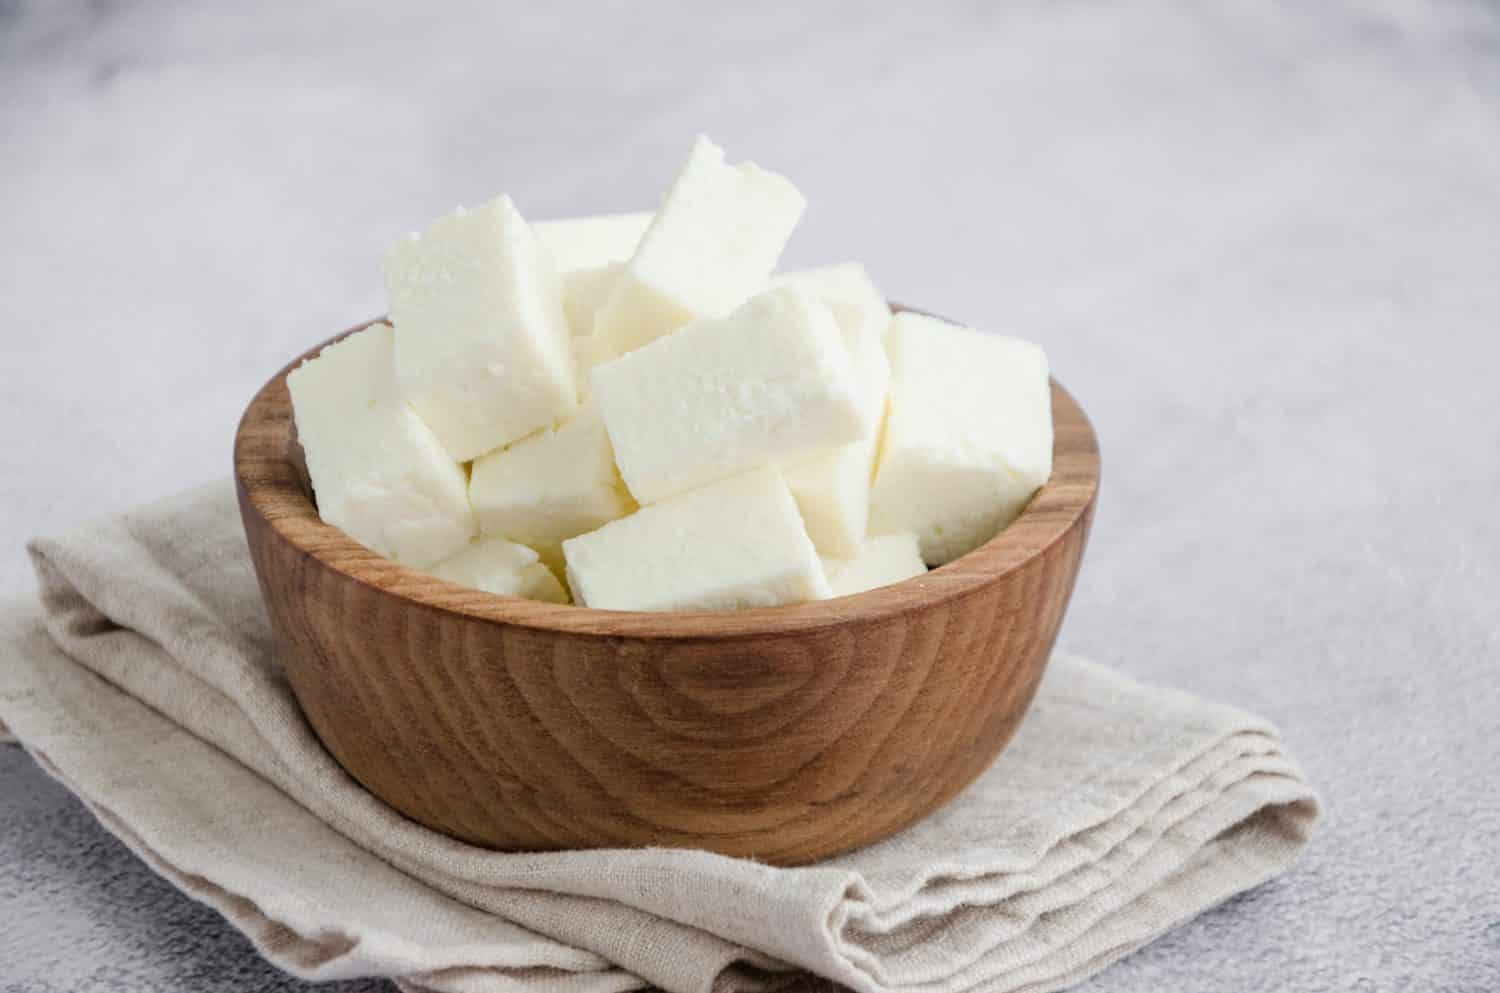 Homemade Indian paneer cheese made from fresh milk and lemon juice, diced in a wooden bowl on a gray stone background. Horizontal orientation. Close up